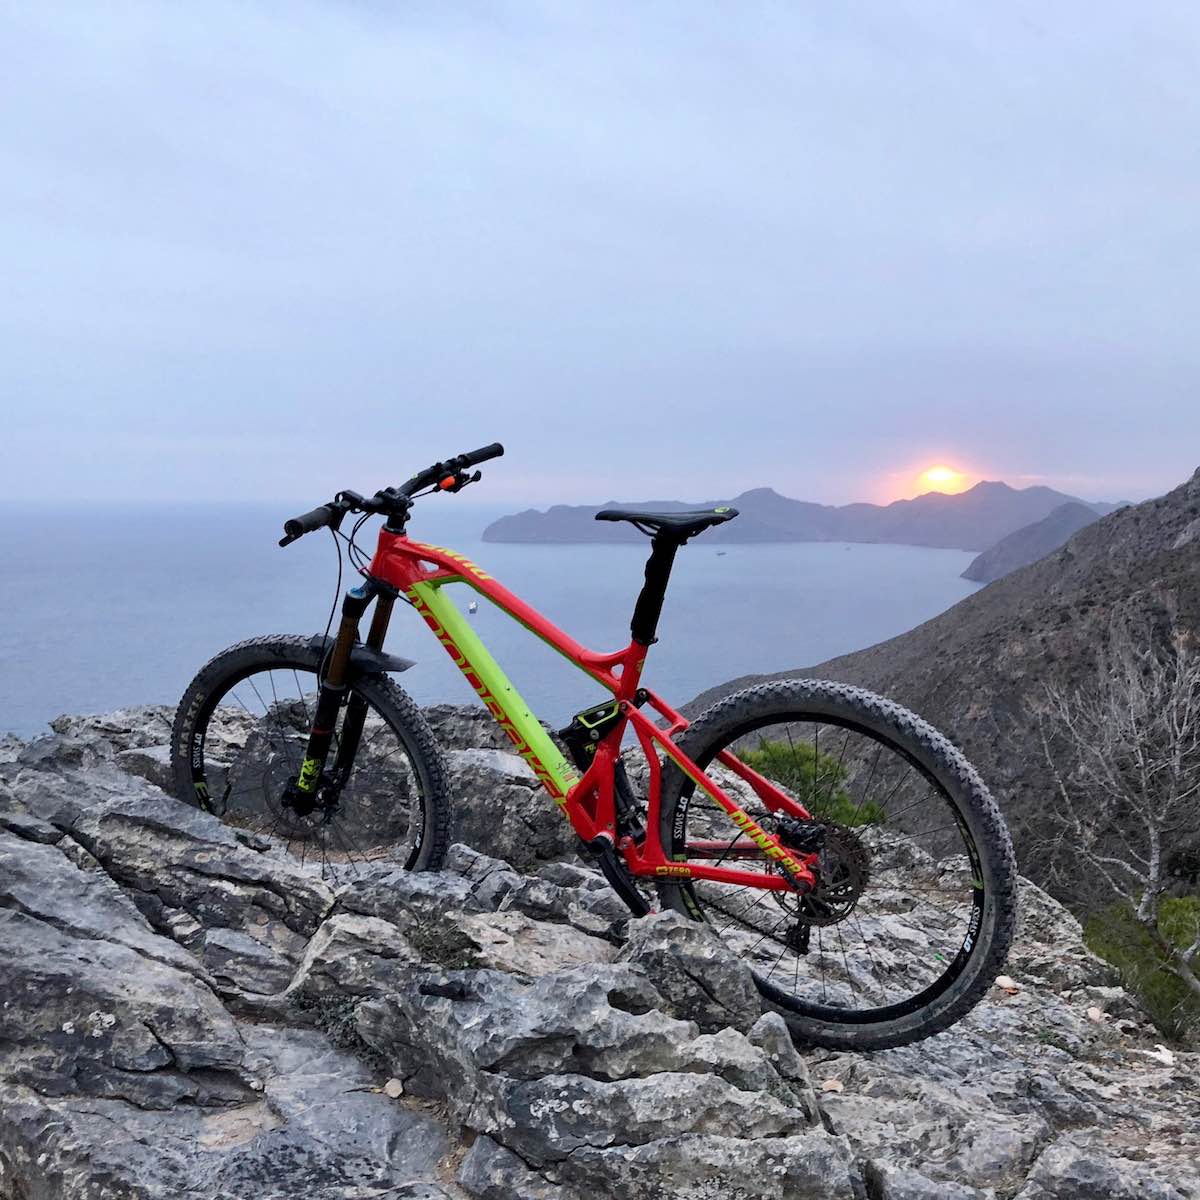 bikerumor pic of the day Cartagena’s coast from el Mirador del Roldán, one of the nearest mountain pass of our city, and one of the most well-known places near to Cartagena, Spain, Cabo Tiñoso (Tiñoso cape).